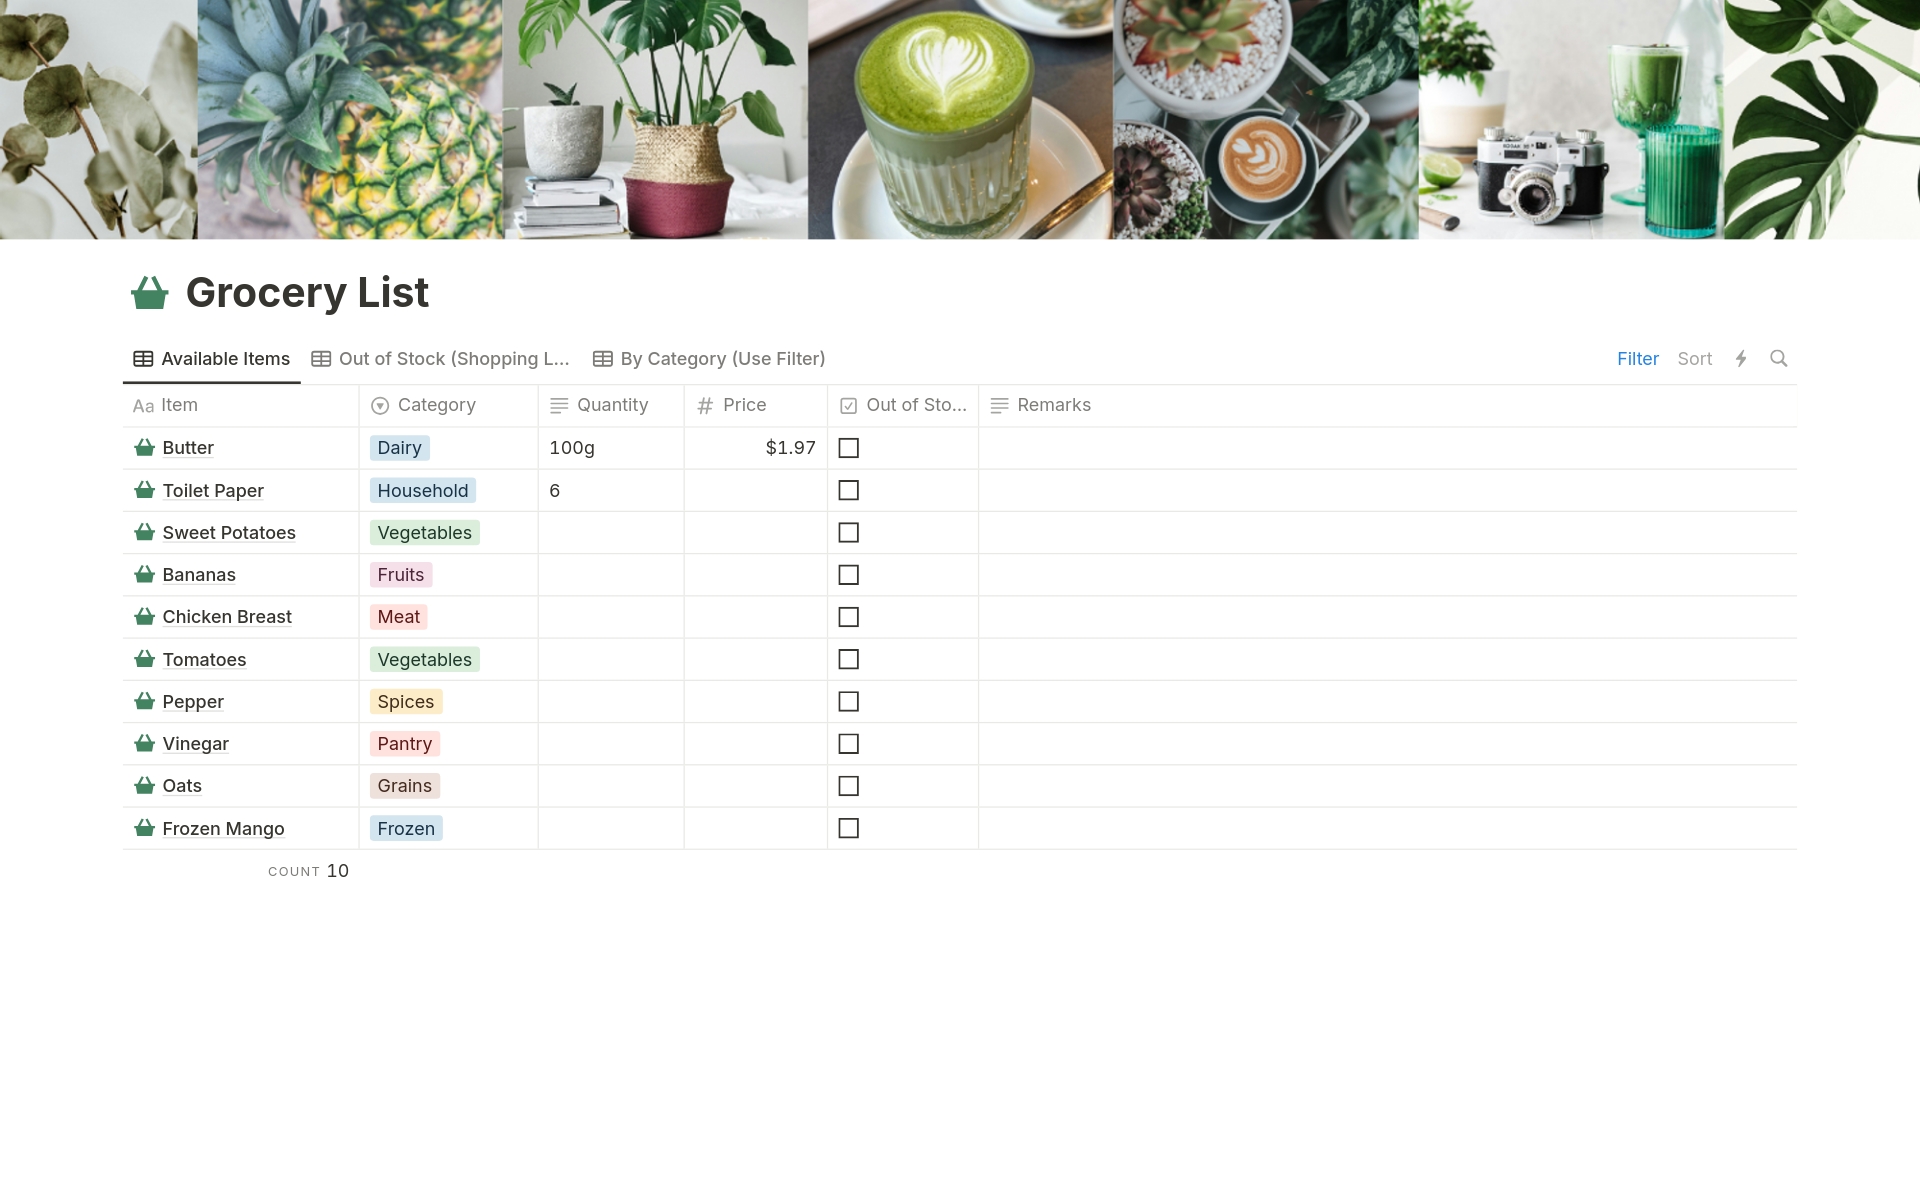 Revamp your meal planning with our Notion Meal Planner Template! Organize recipes, track your culinary journey, and embrace the digital aesthetic of a sleek food journal. Simplify your kitchen adventures today!